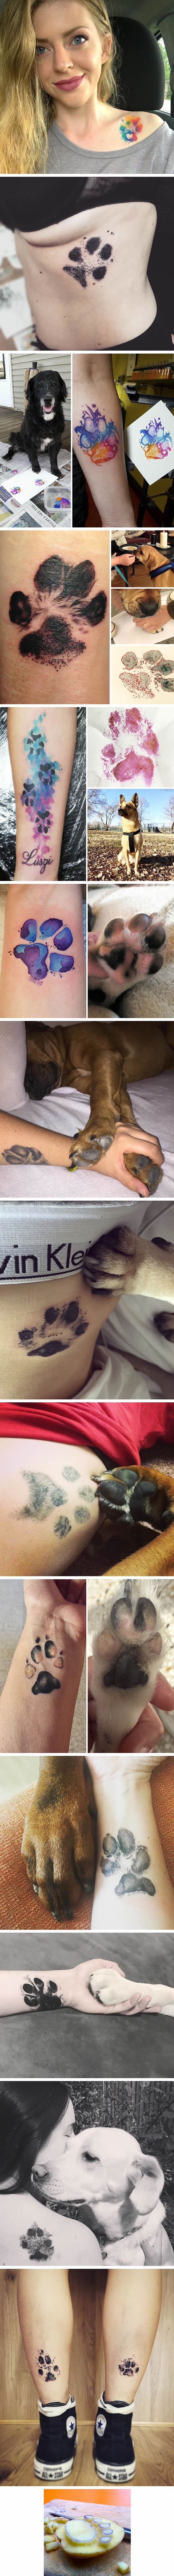 People Are Getting Their Dog&#039;s Paw Print To Make Tattoos And That Looks Unexpectedly Good